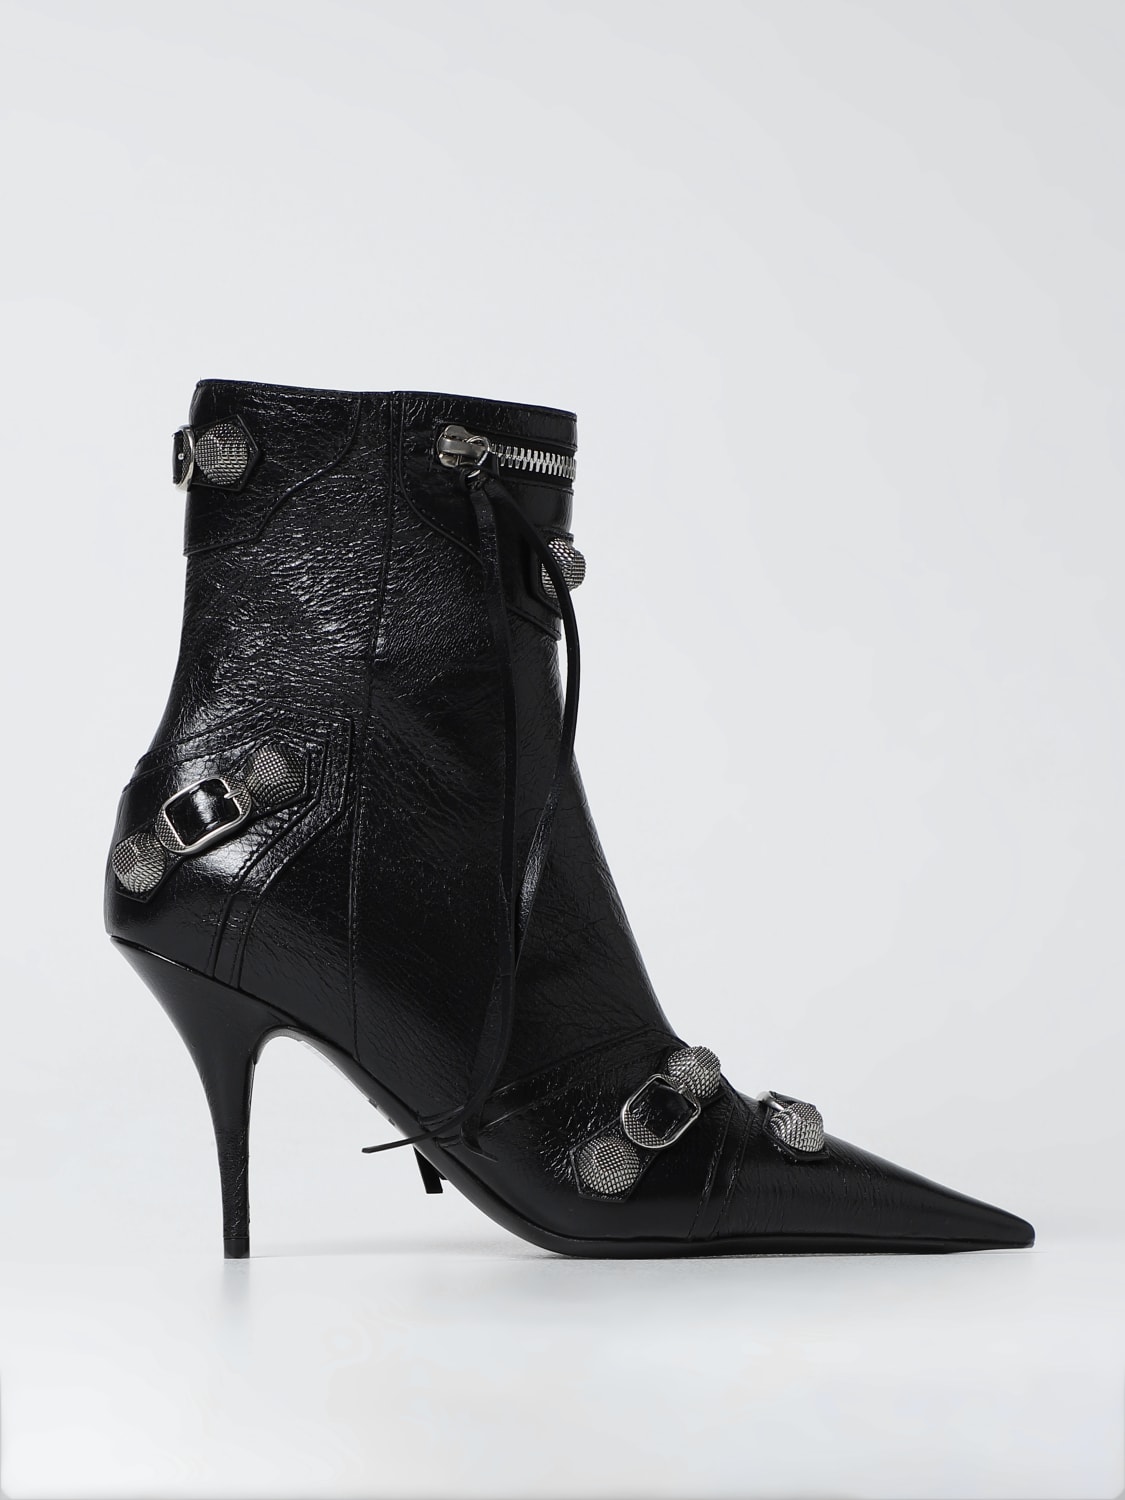 huh Gods ar BALENCIAGA: Cagole ankle boots in leather - Black | Balenciaga flat ankle  boots 694379WAD4E online at GIGLIO.COM